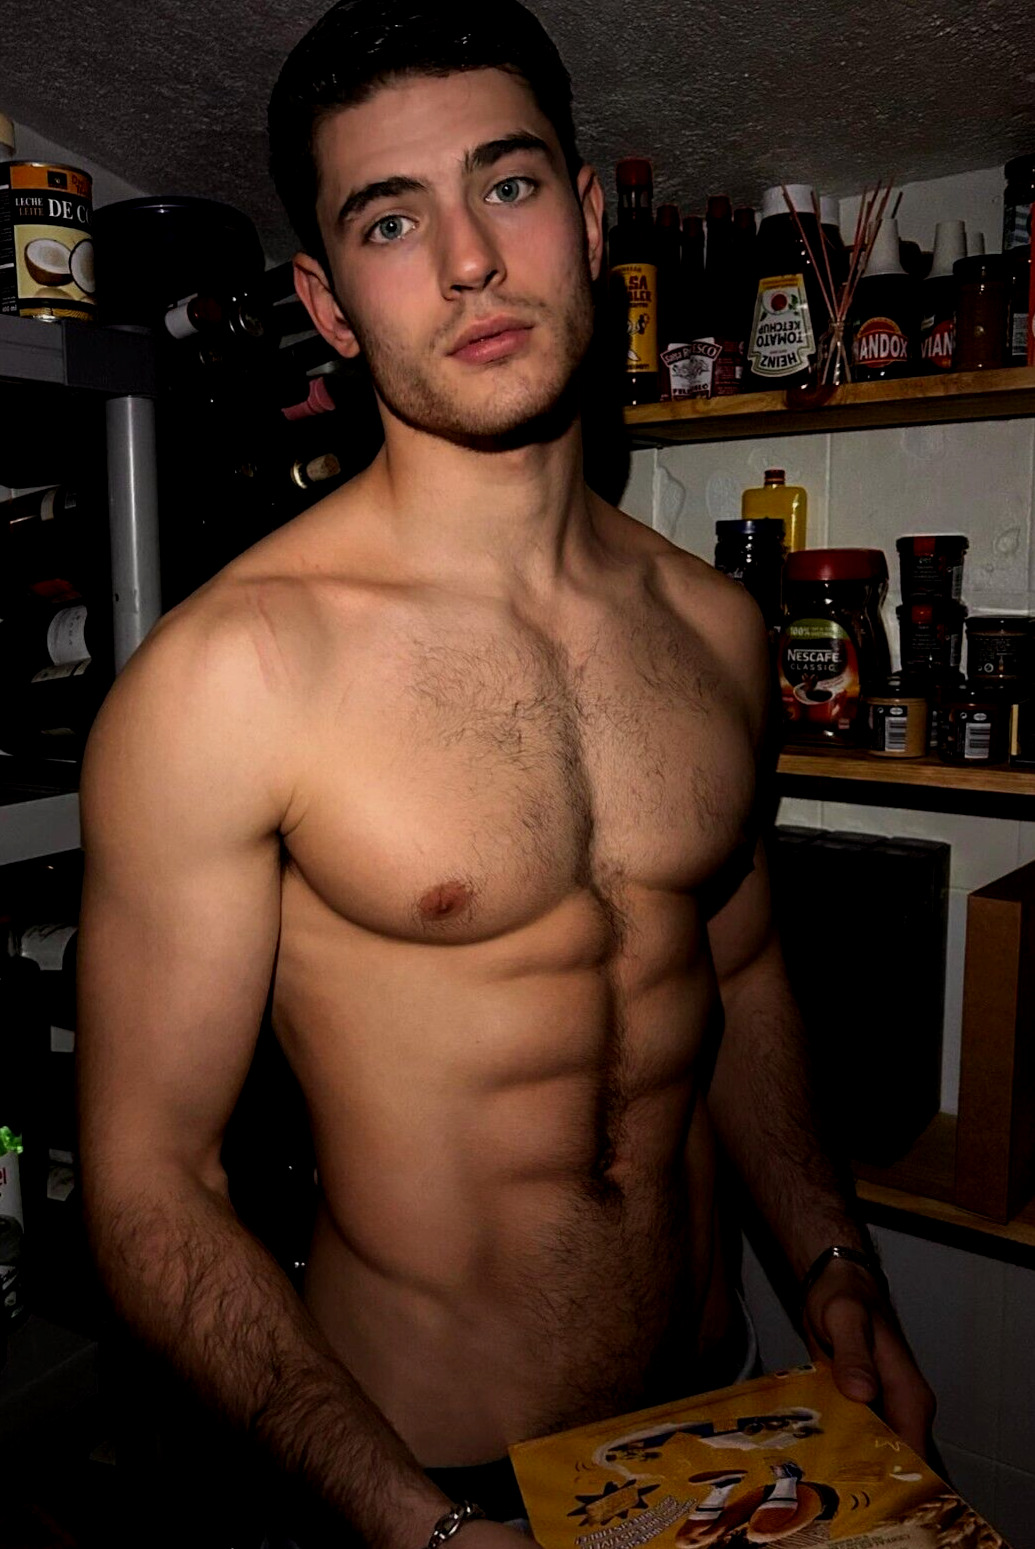 Shirtless Male Muscular Amazing Physique Beefcake in Pantry PHOTO 4X6 H685